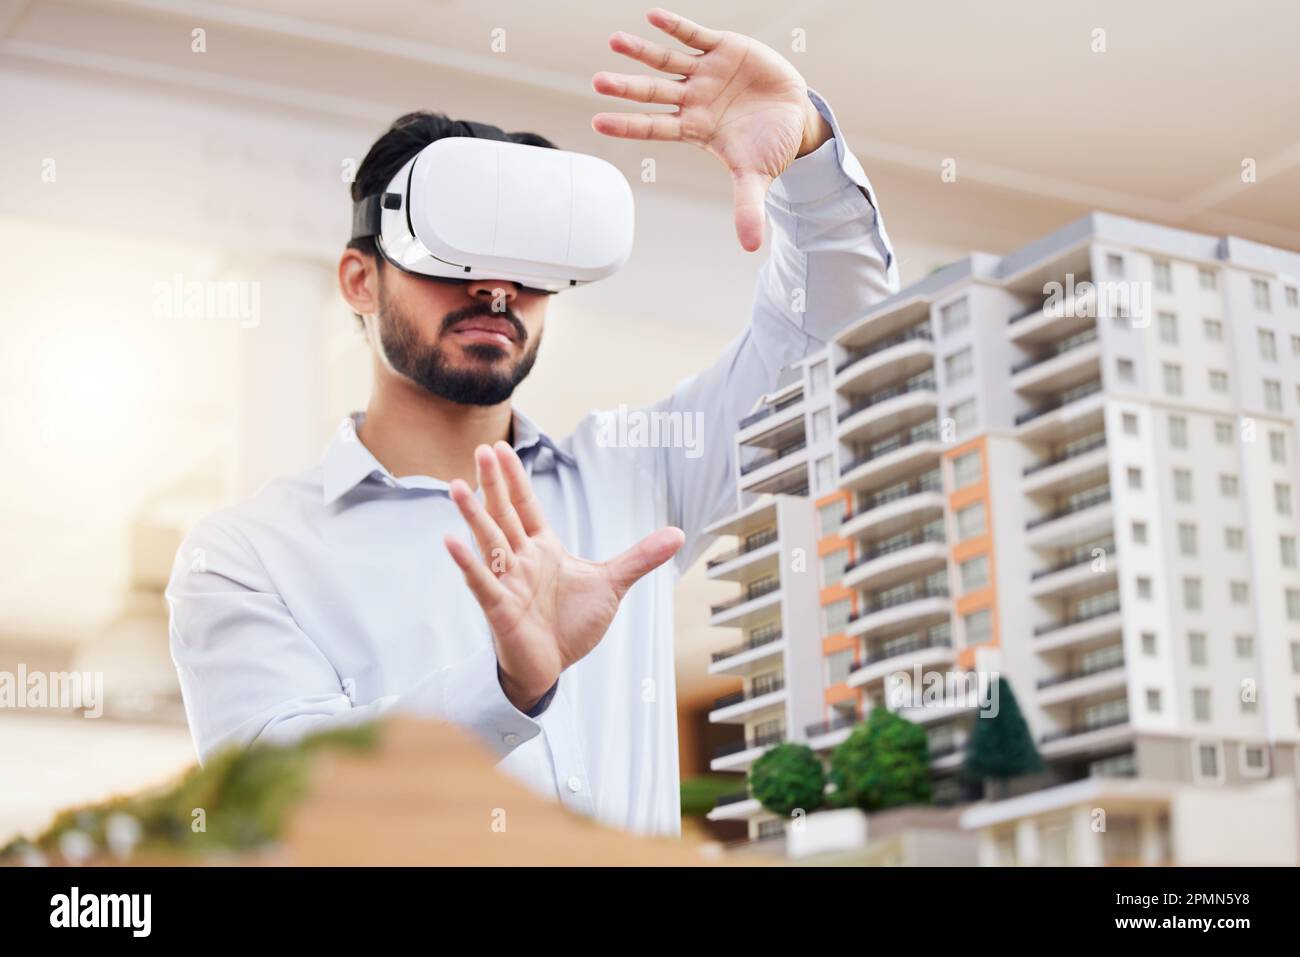 Architect, man and VR architecture model, construction and building with future technology and UX. Virtual reality goggles, design and engineering Stock Photo